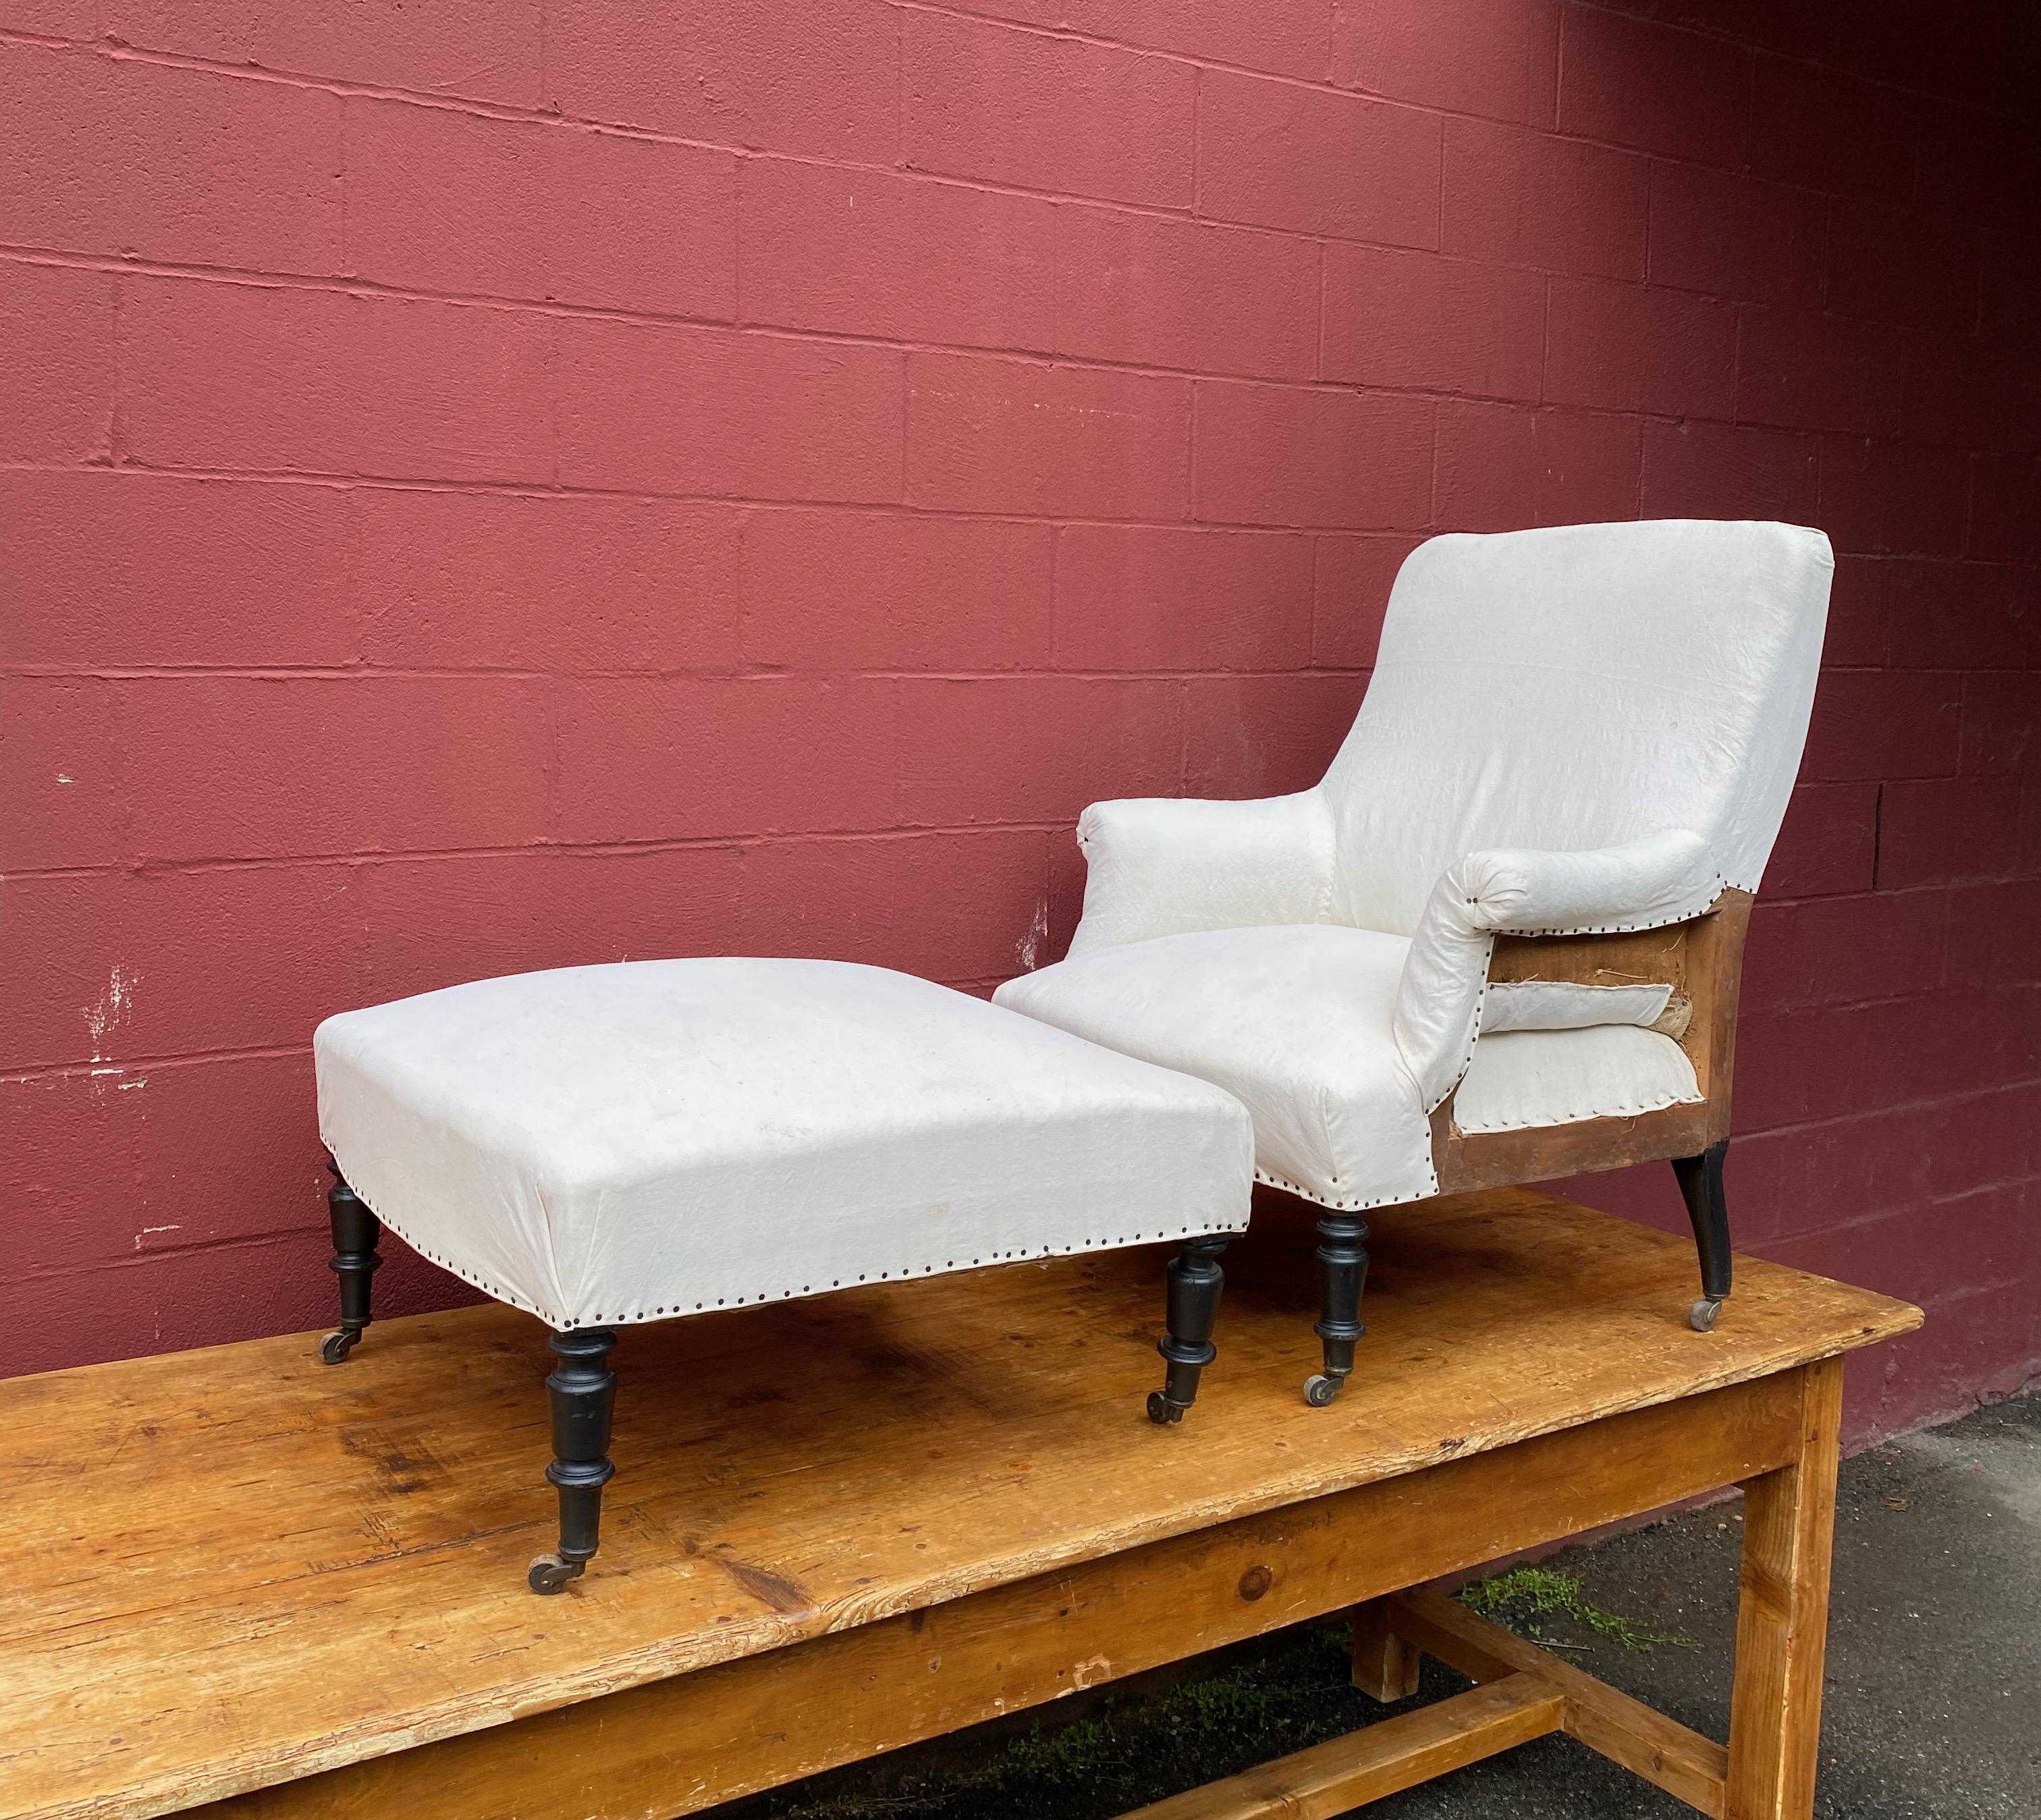 An armchair and matching ottoman in the French Napoleon III style, referred to in French as a “duchesse brisée”. Both pieces have been stripped down to the muslin and are ready to be upholstered.

Dimensions: 30” D x 31” W x 36” H (seat height